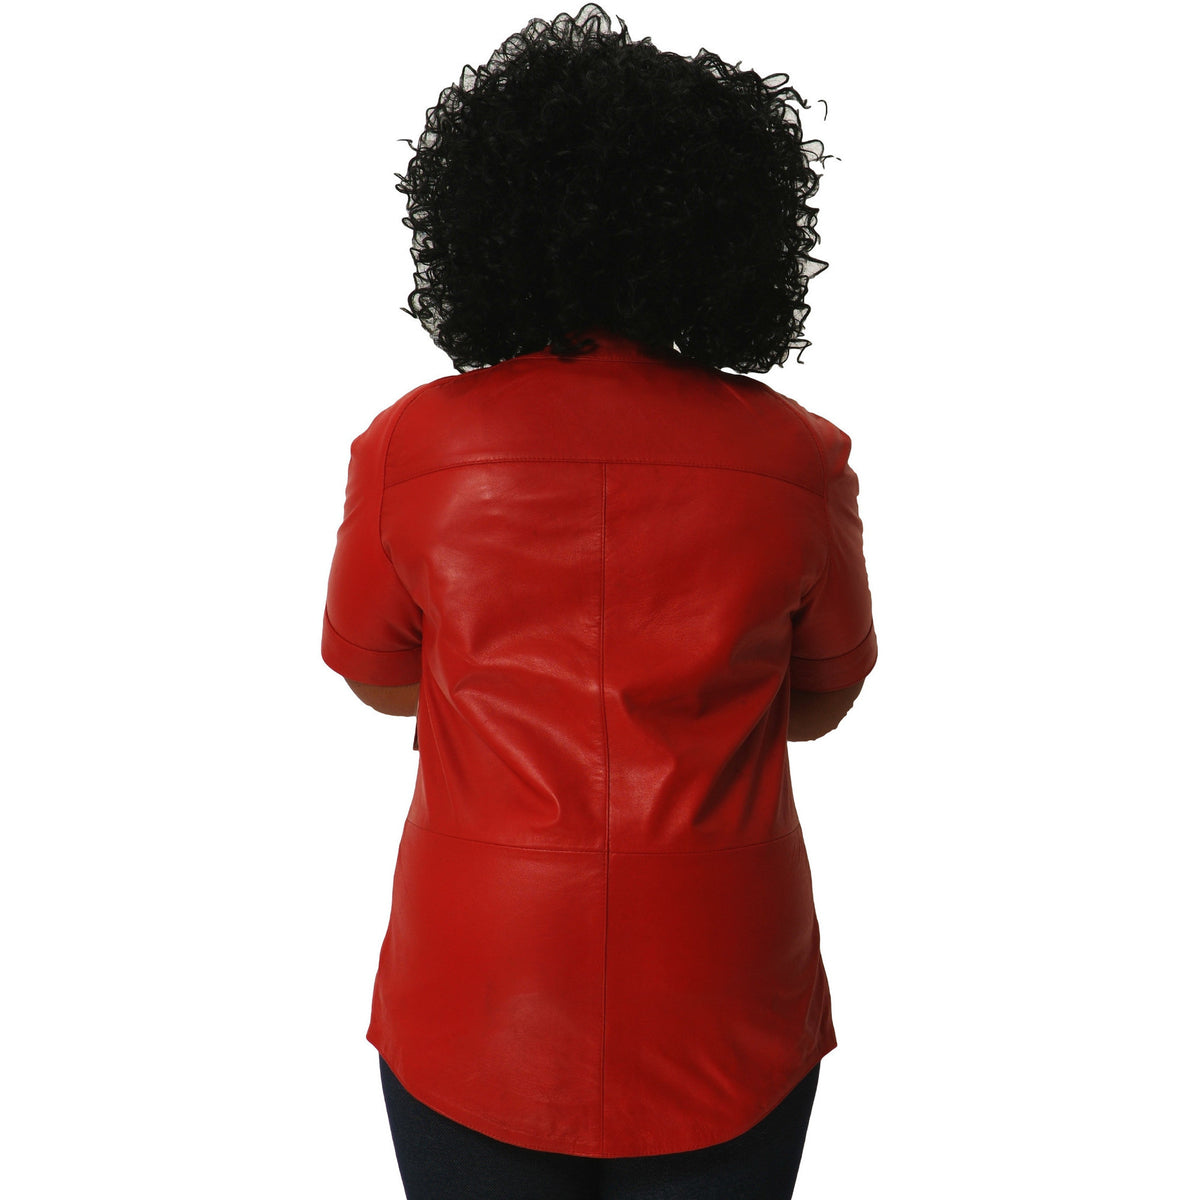 Womens red leather tee shirt back